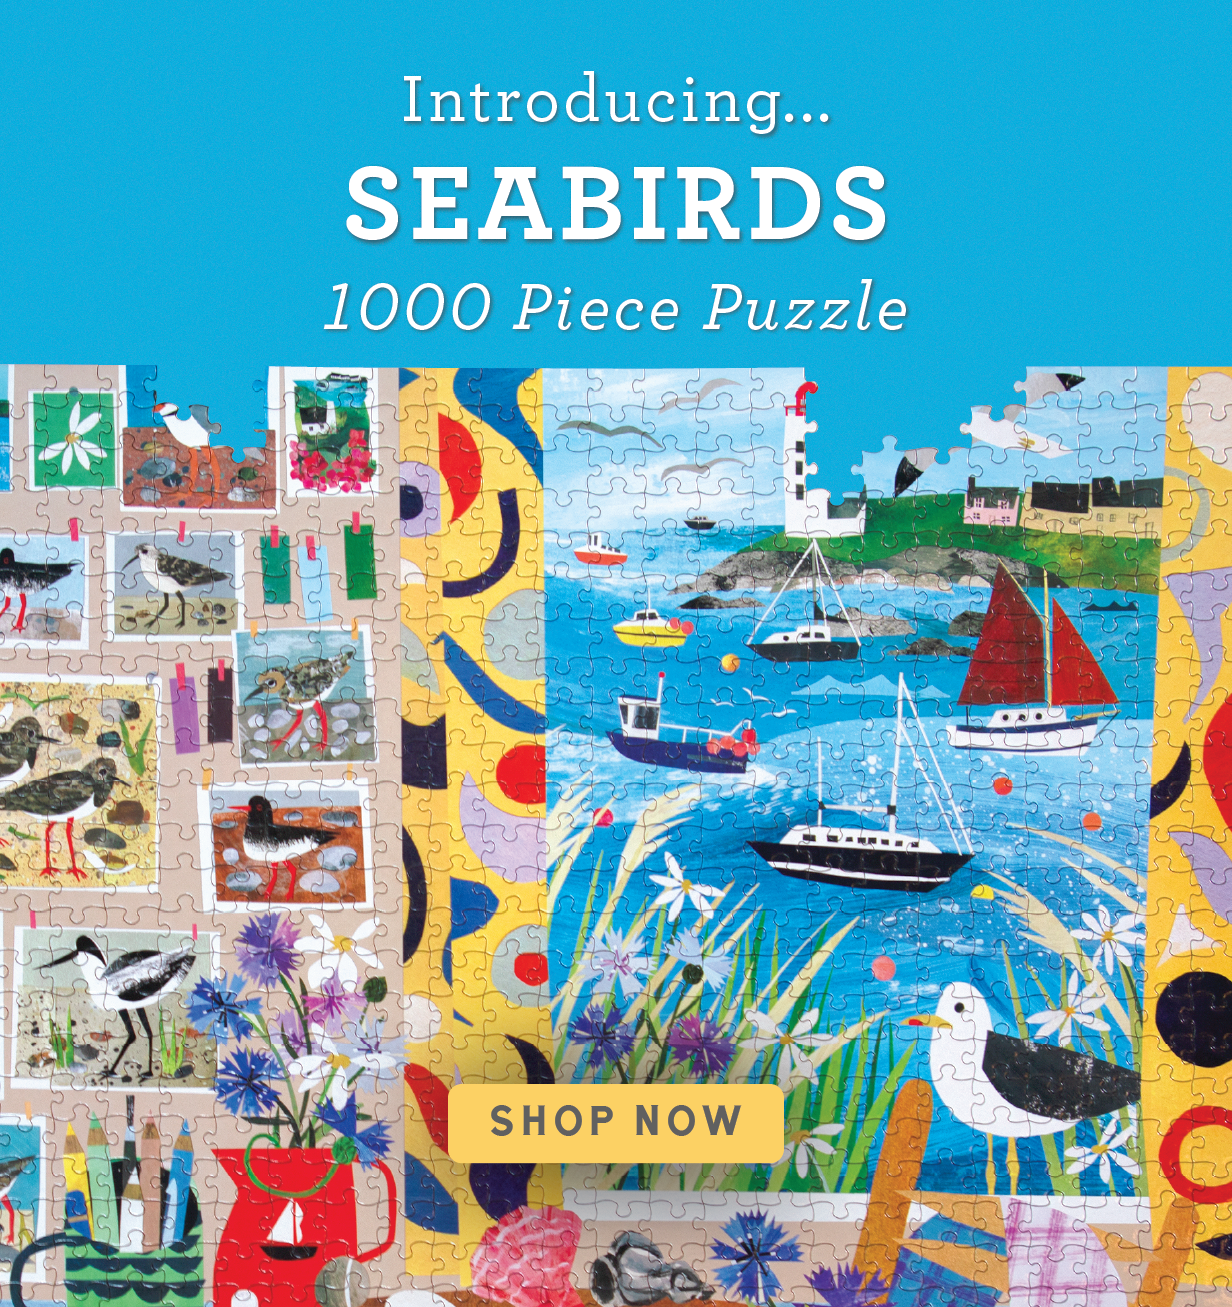 Introducing New Seabirds 1000 Piece Puzzle